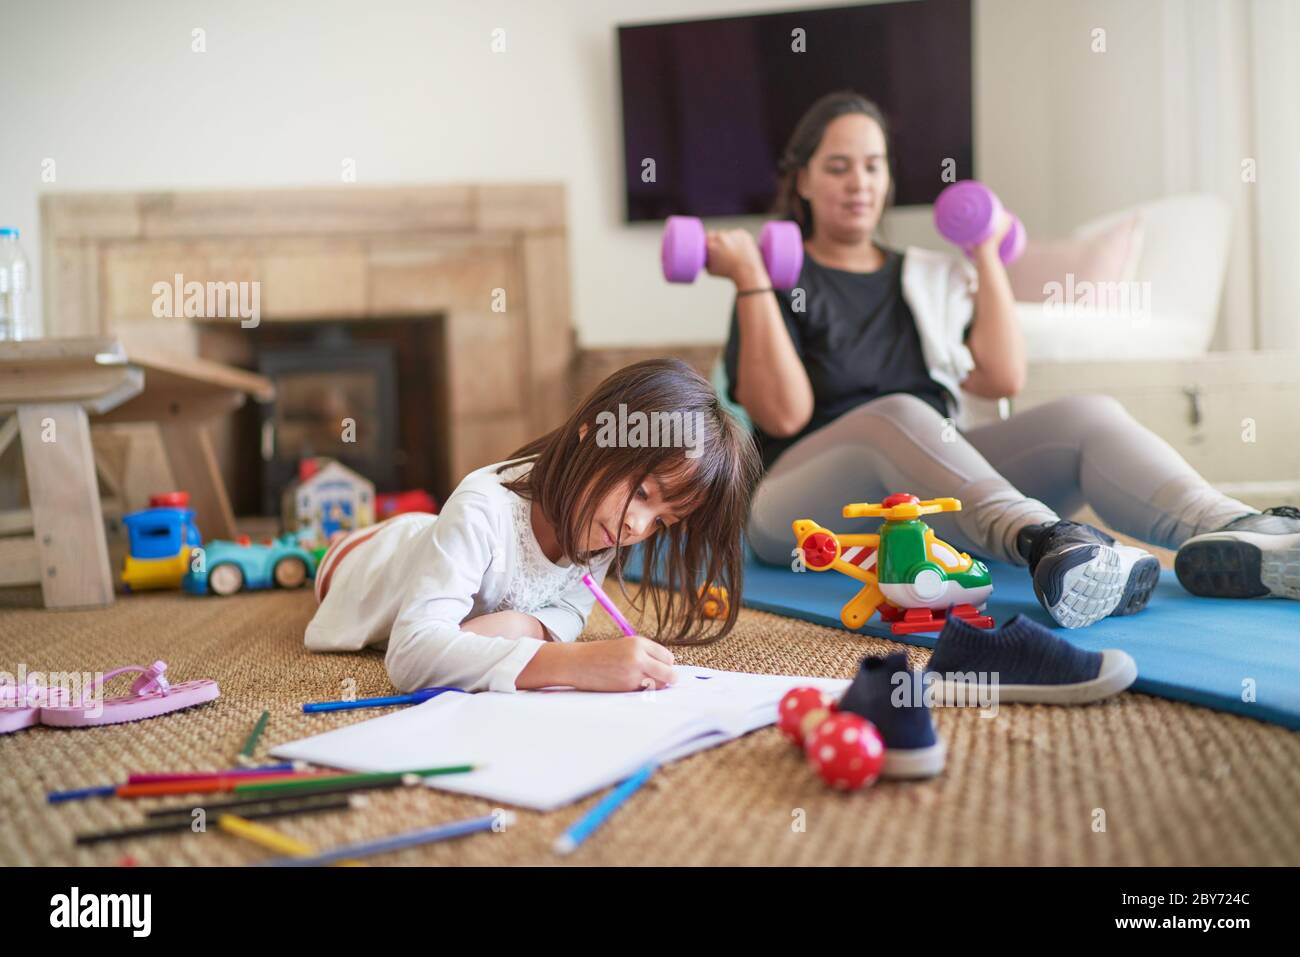 Daughter coloring while mother exercises in living room Stock Photo